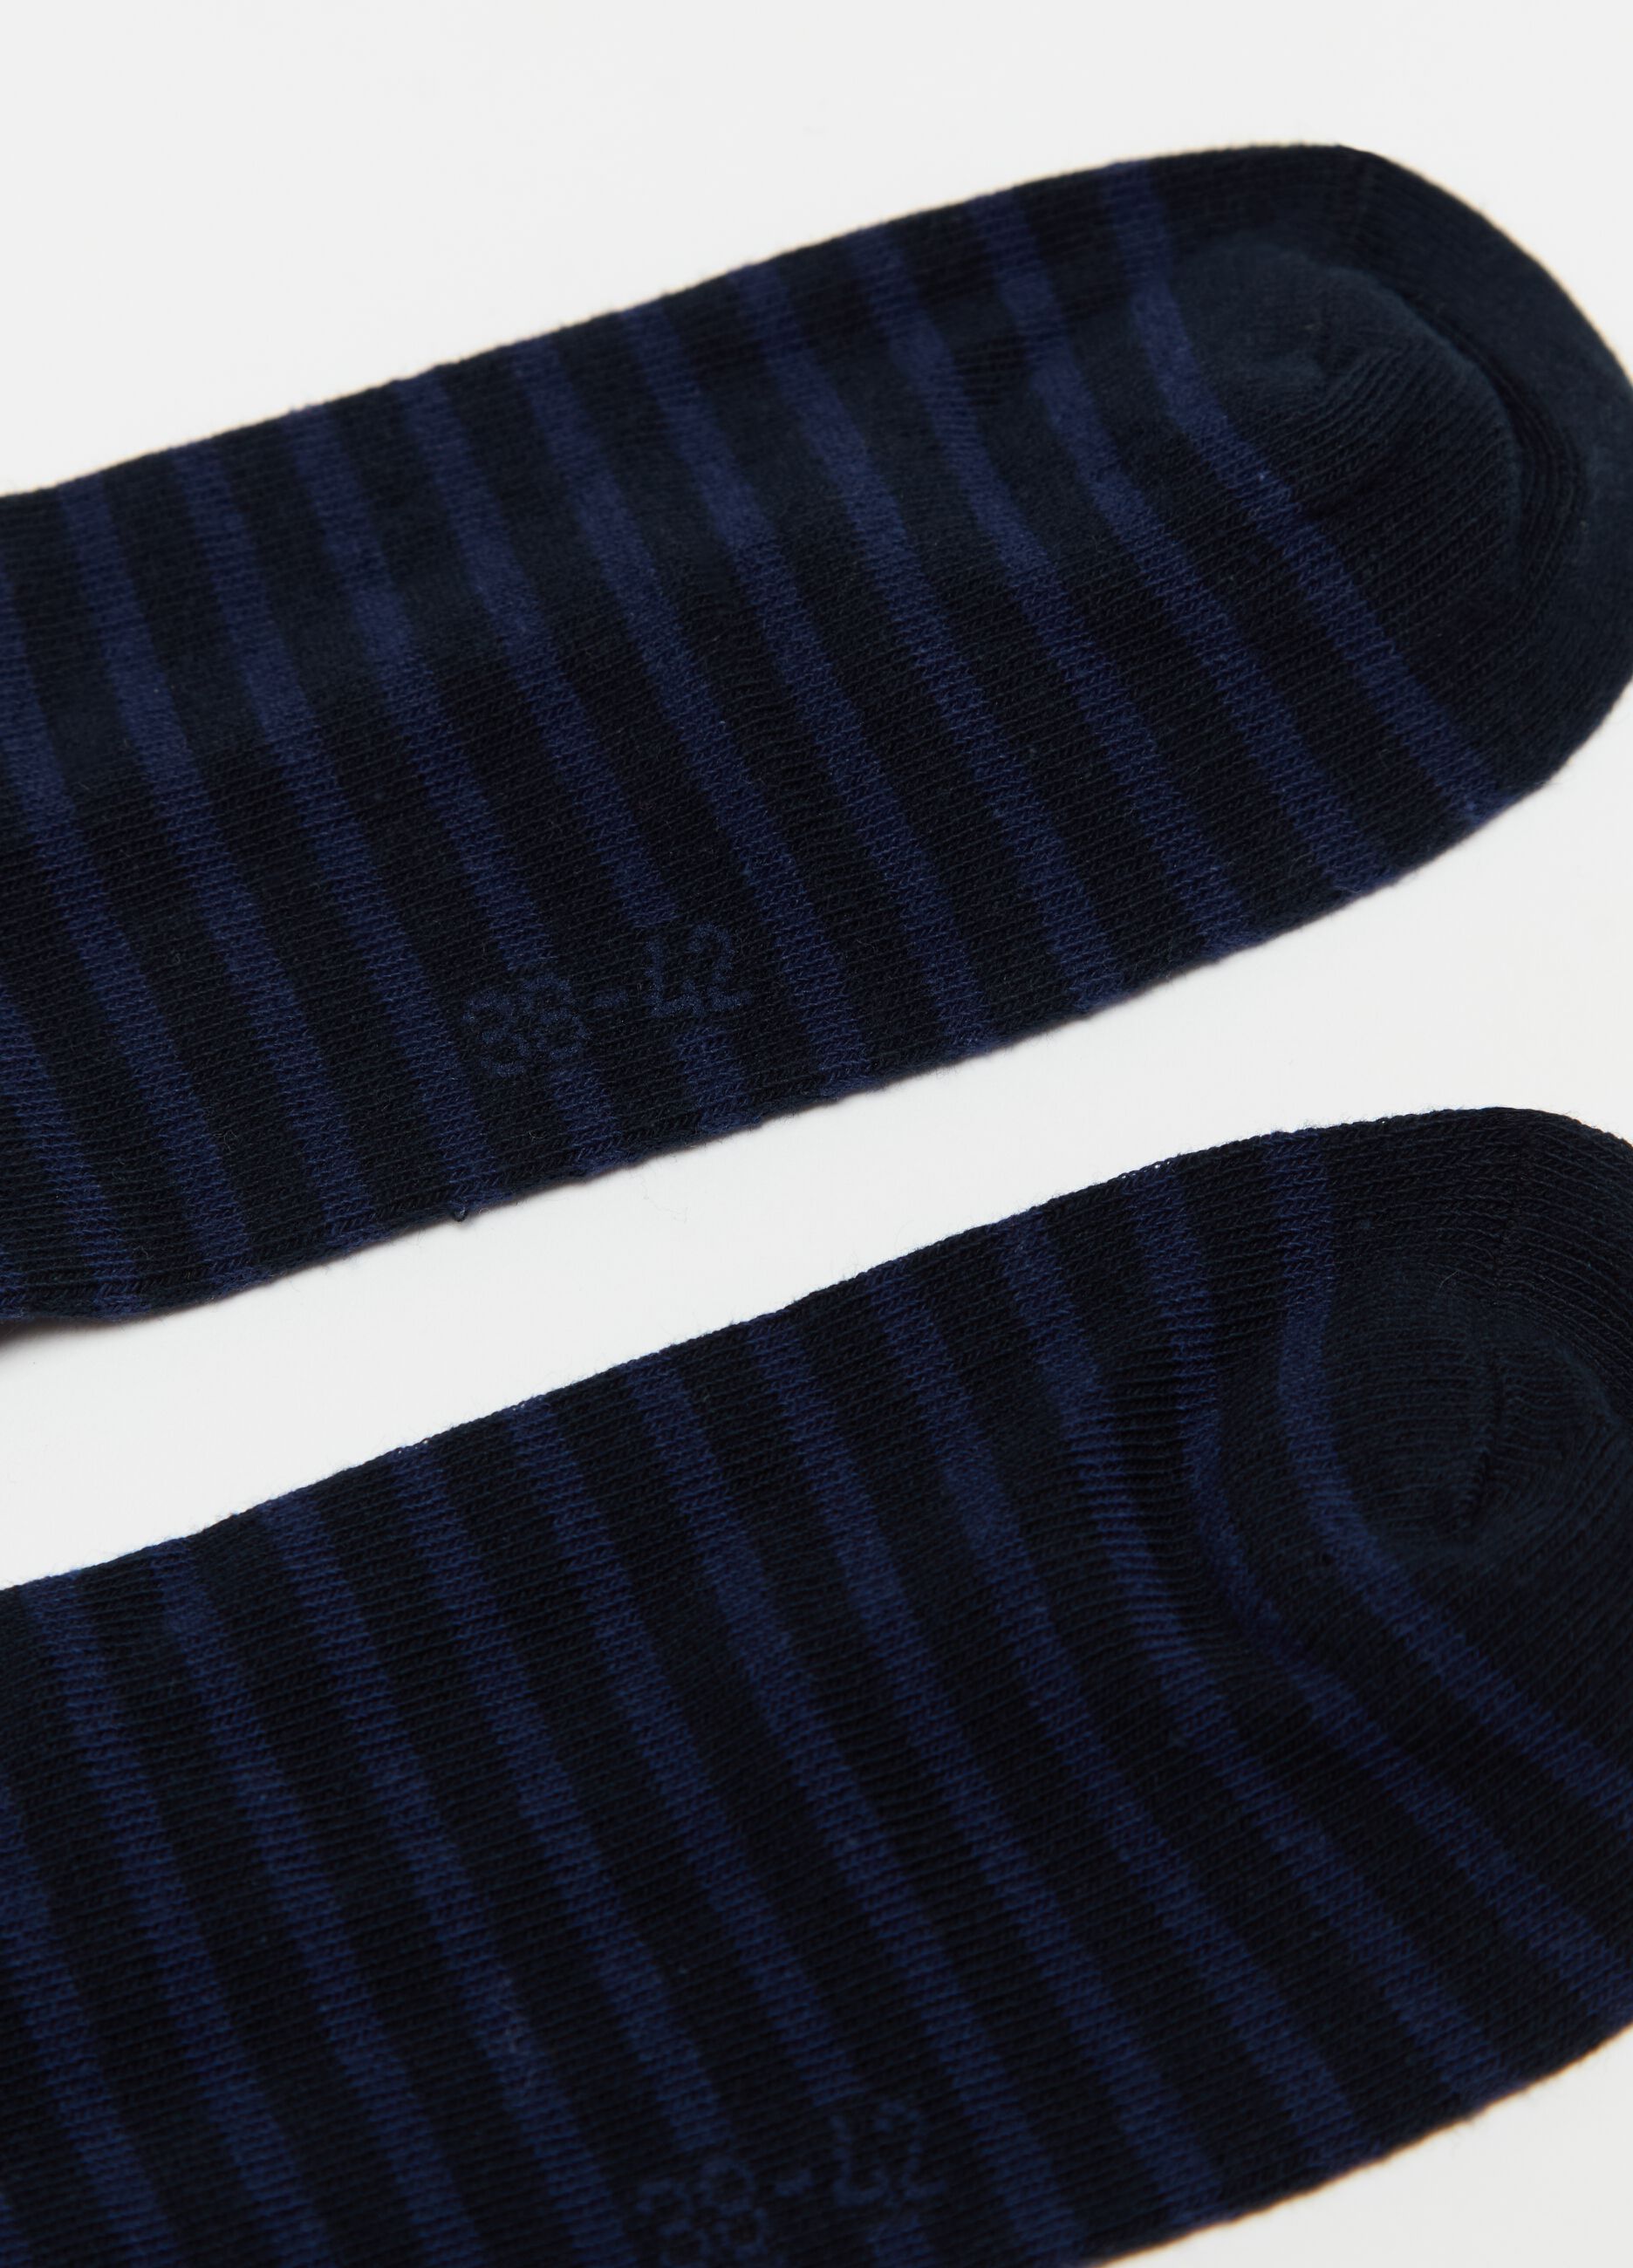 Three-pack shoe liners with striped design